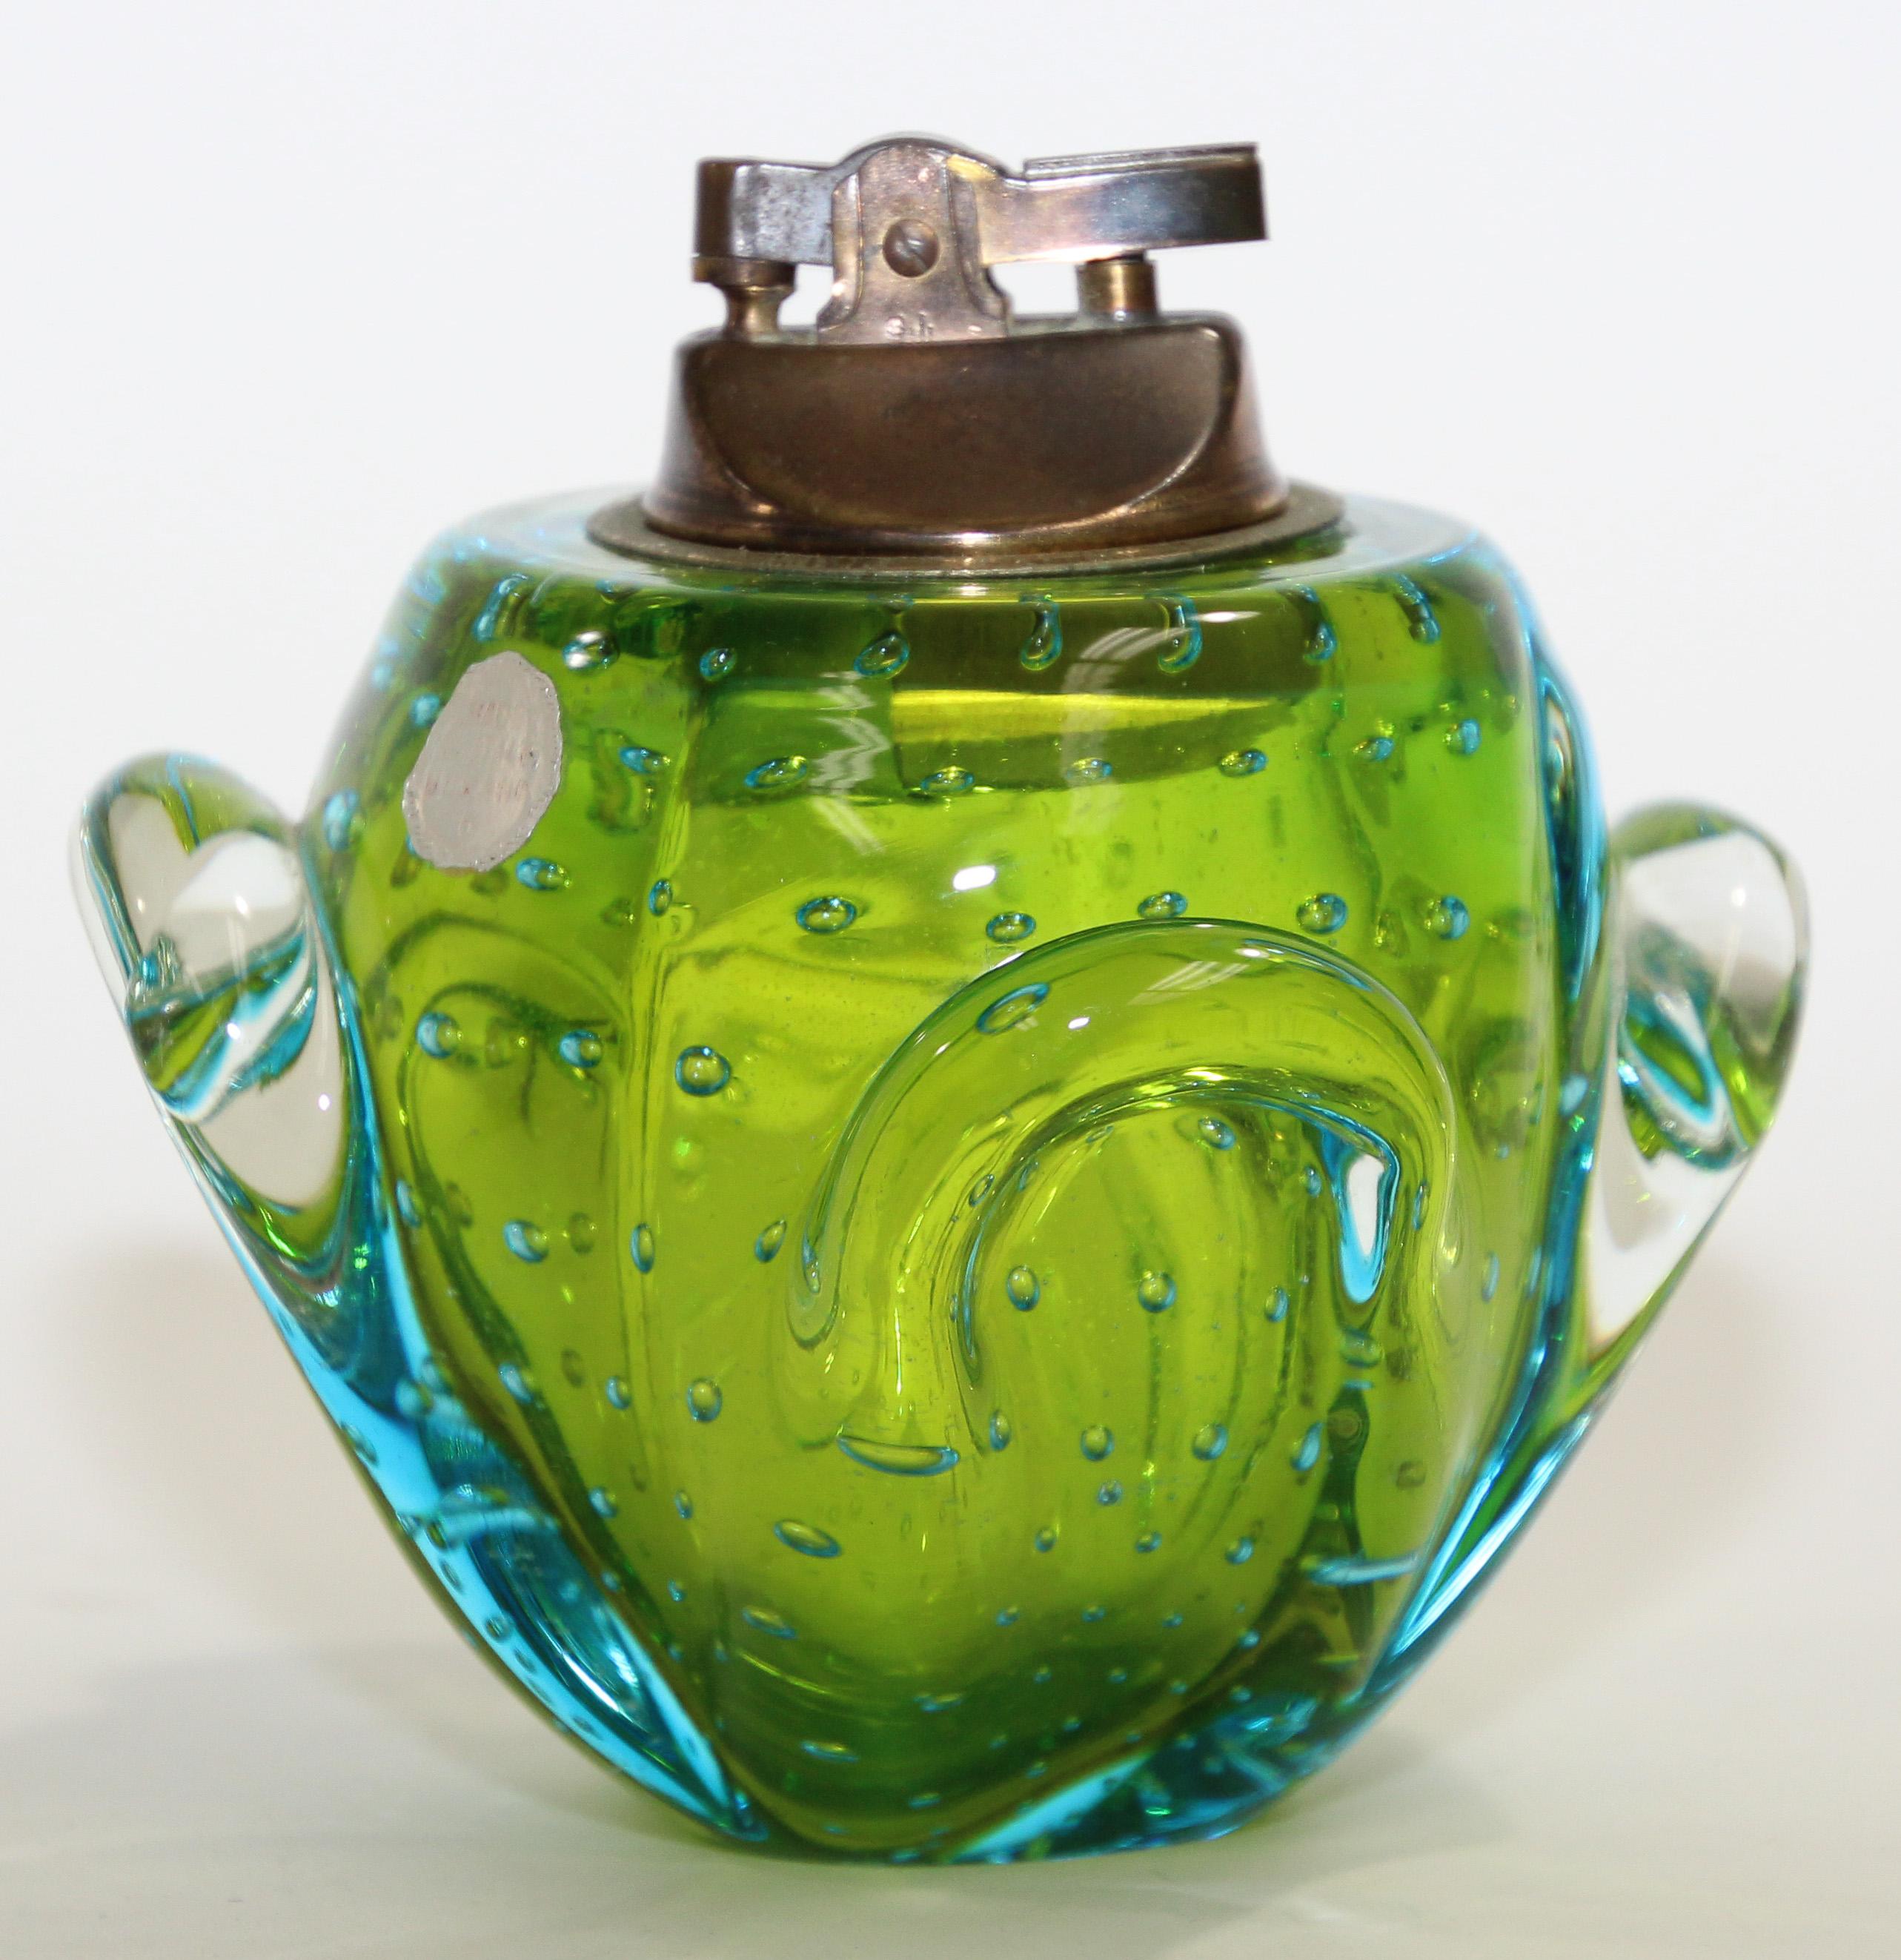 Vintage retro 1970s heavy Murano green and blue glass table lighter-paperweight with brass.
A dramatic accent to any modern living room decor, this Murano lighter will elevate any coffee table or desk surface with its timeless allure.
Measures: